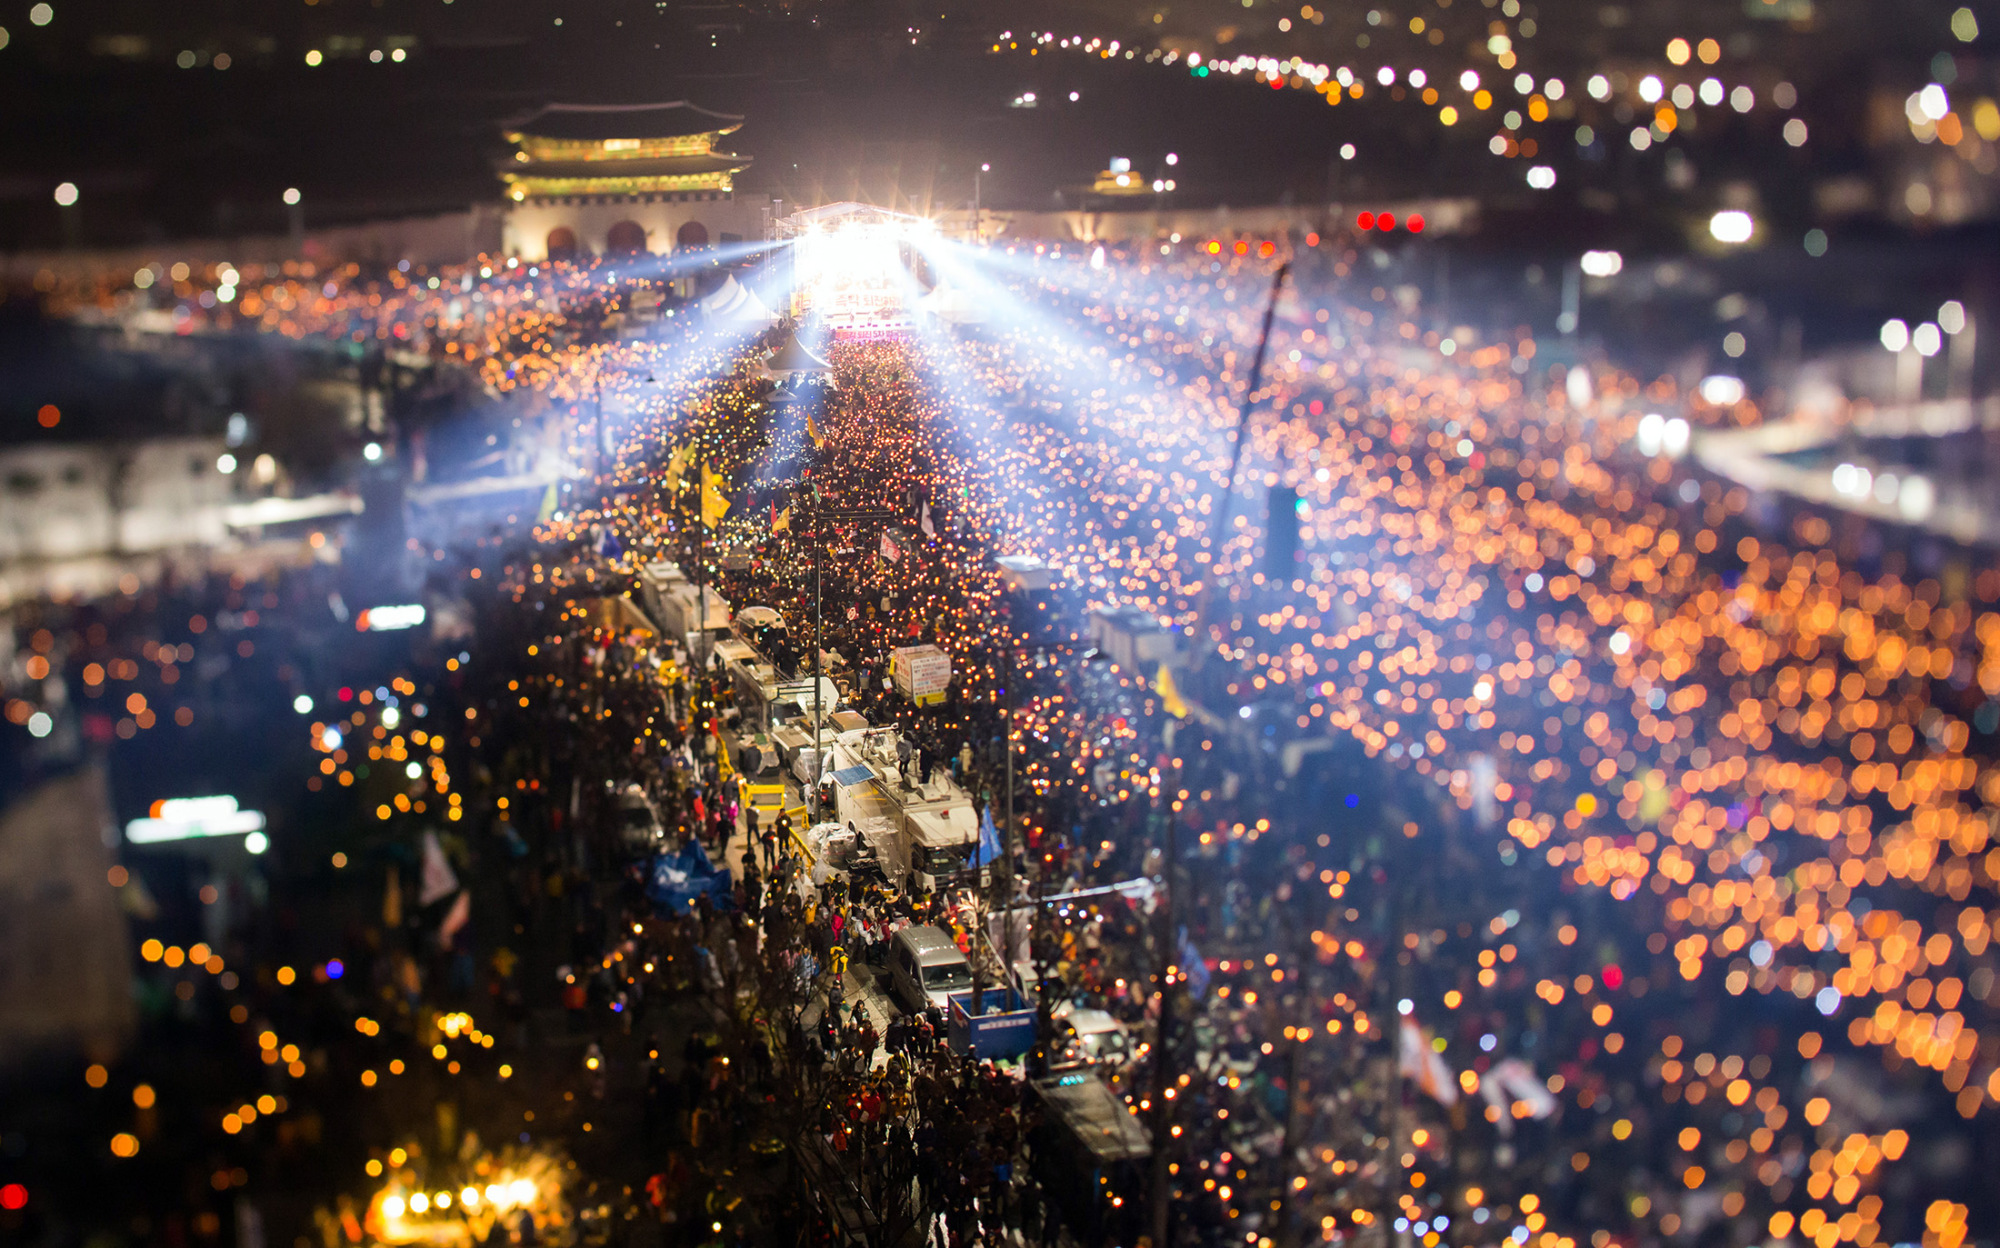 Light shines from a stage as protesters gather in Gwanghwamun square during a candlight rally in Seoul, on Nov. 26, 2016.
